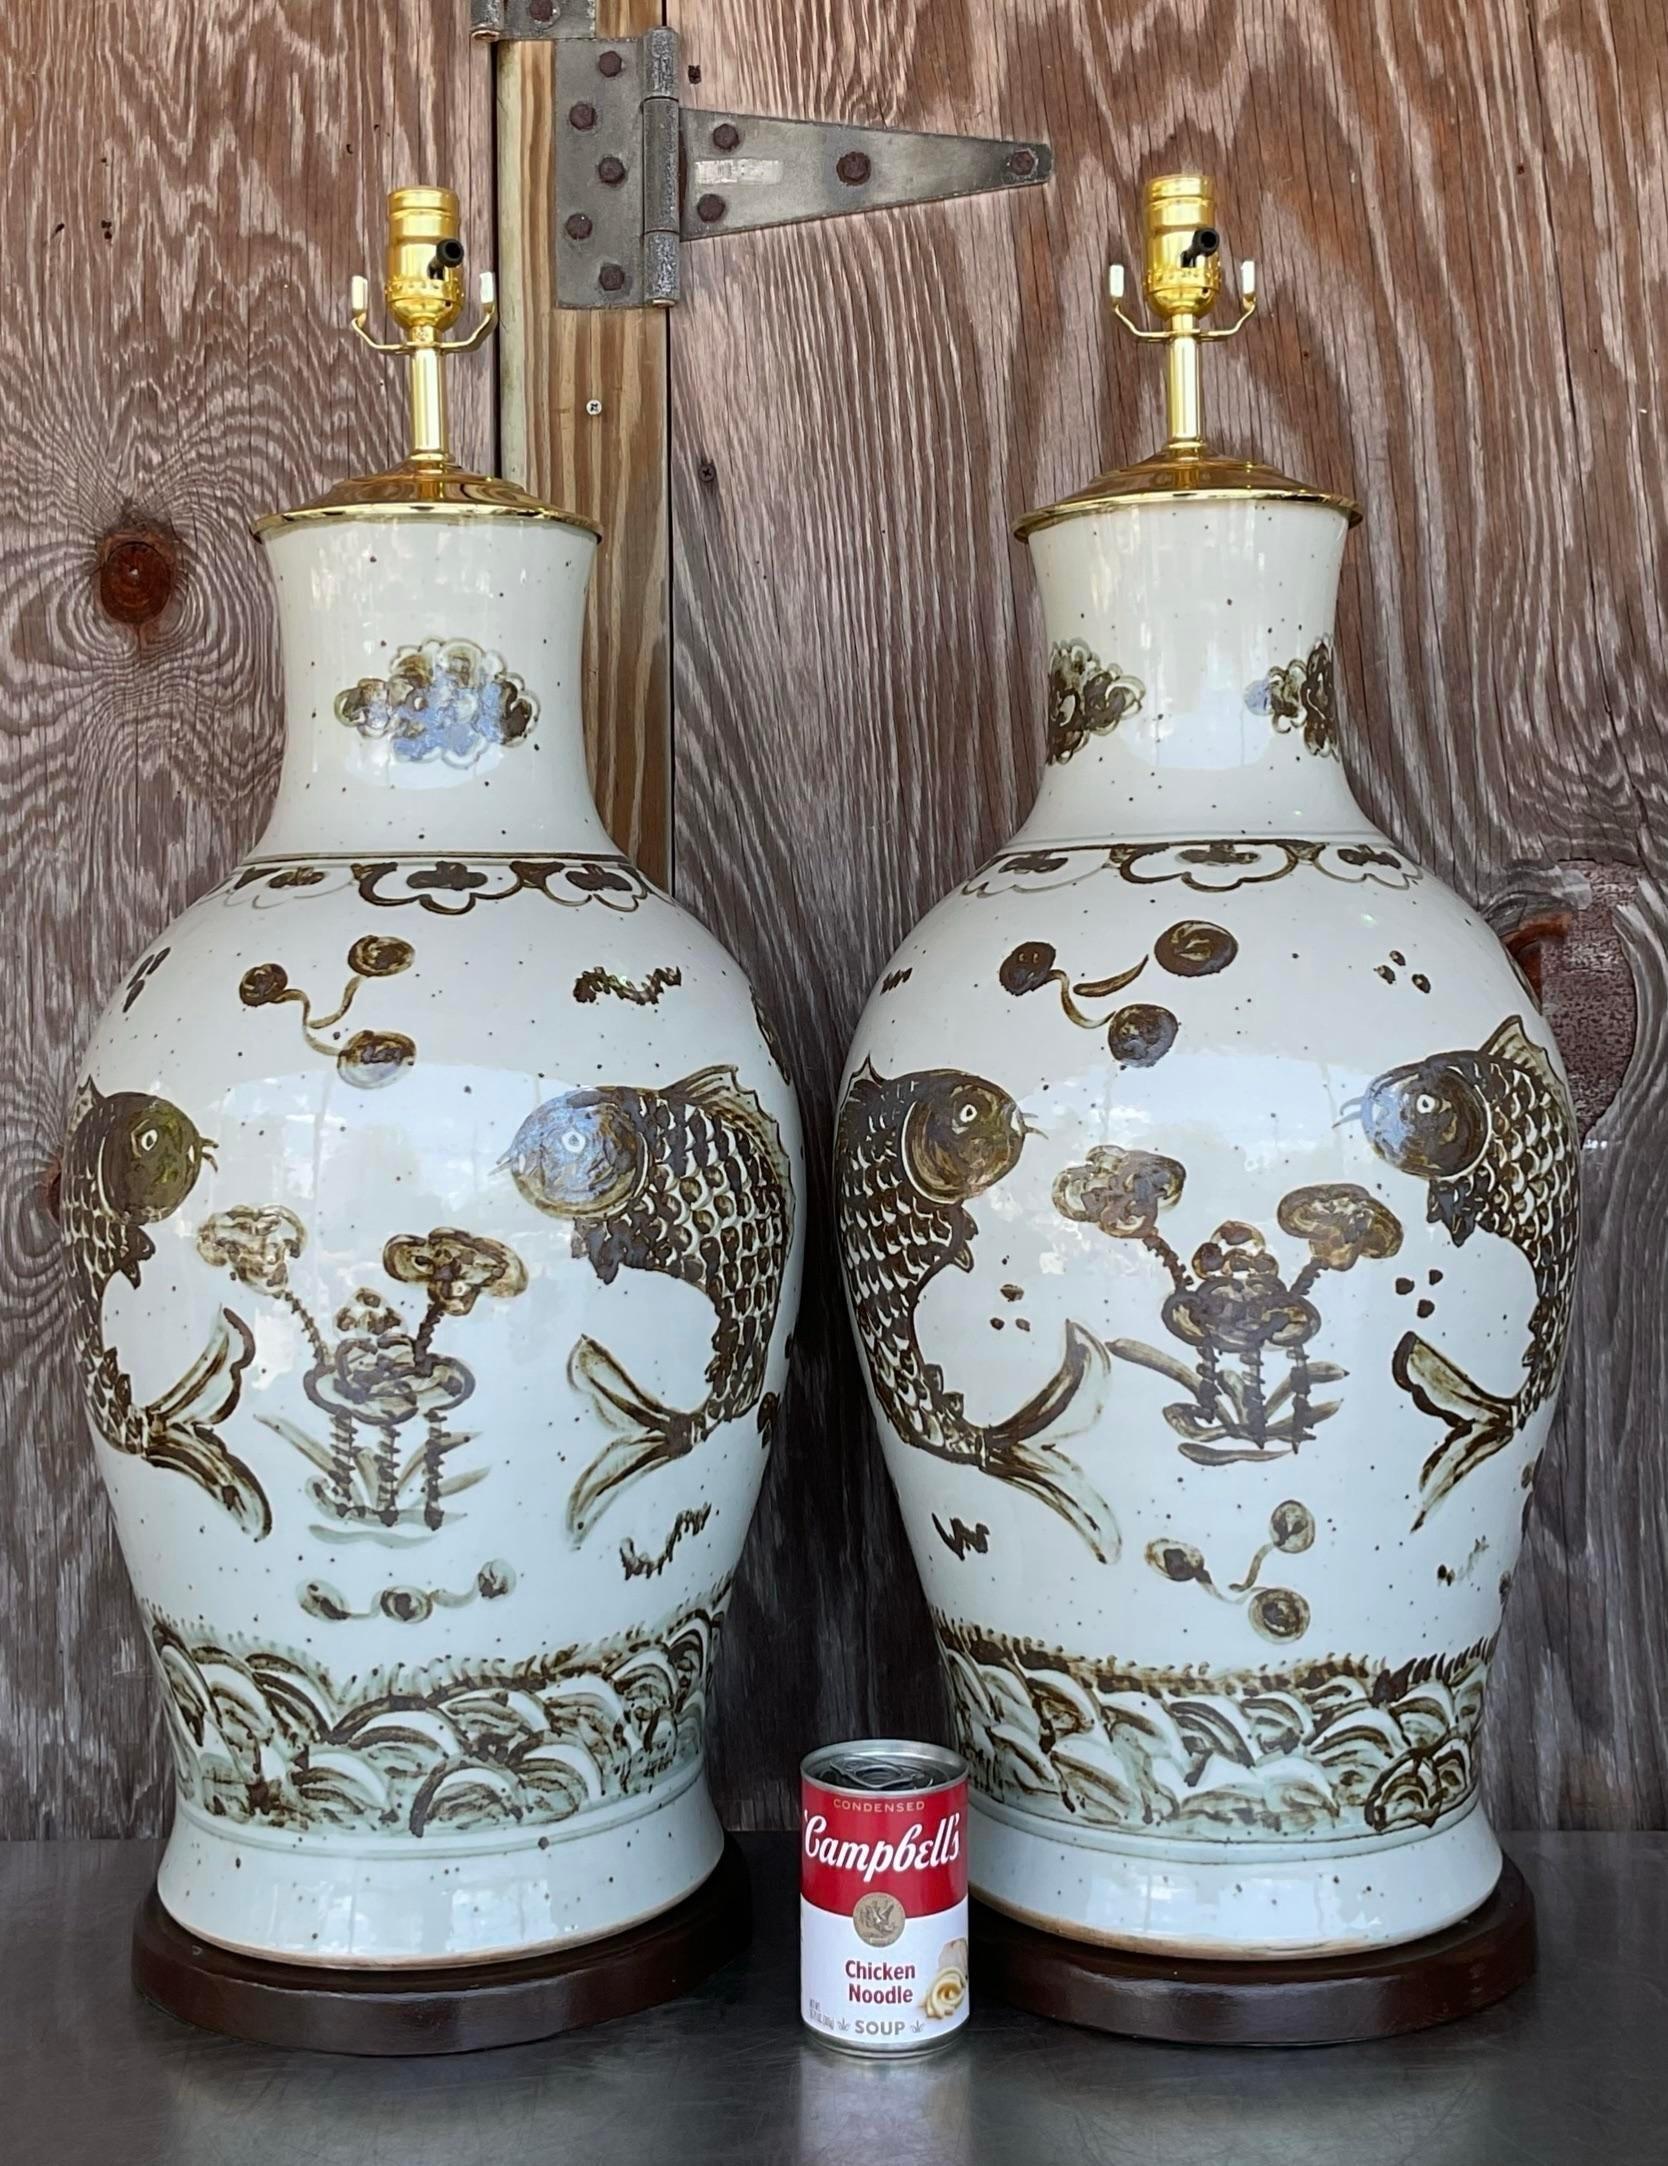 Make a splash with this pair of vintage Regency monumental glazed ceramic koi fish lamps. American-crafted with exquisite detail, these lamps capture the beauty of aquatic life, adding a touch of artistic flair and sophistication to your home